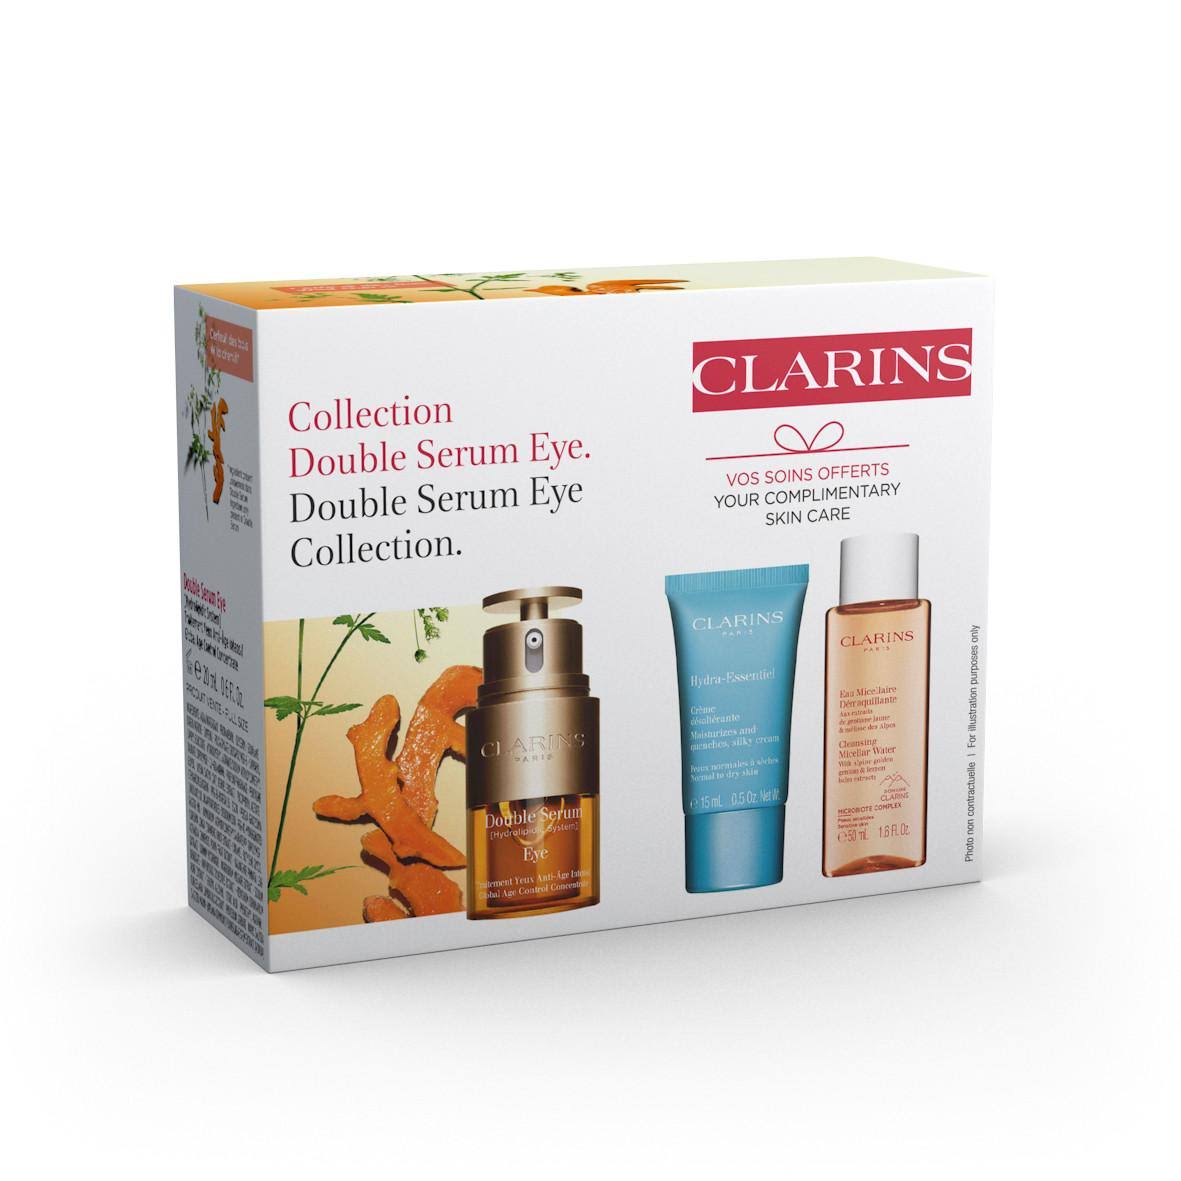 CLARINS - Double Serum Eye Collection.